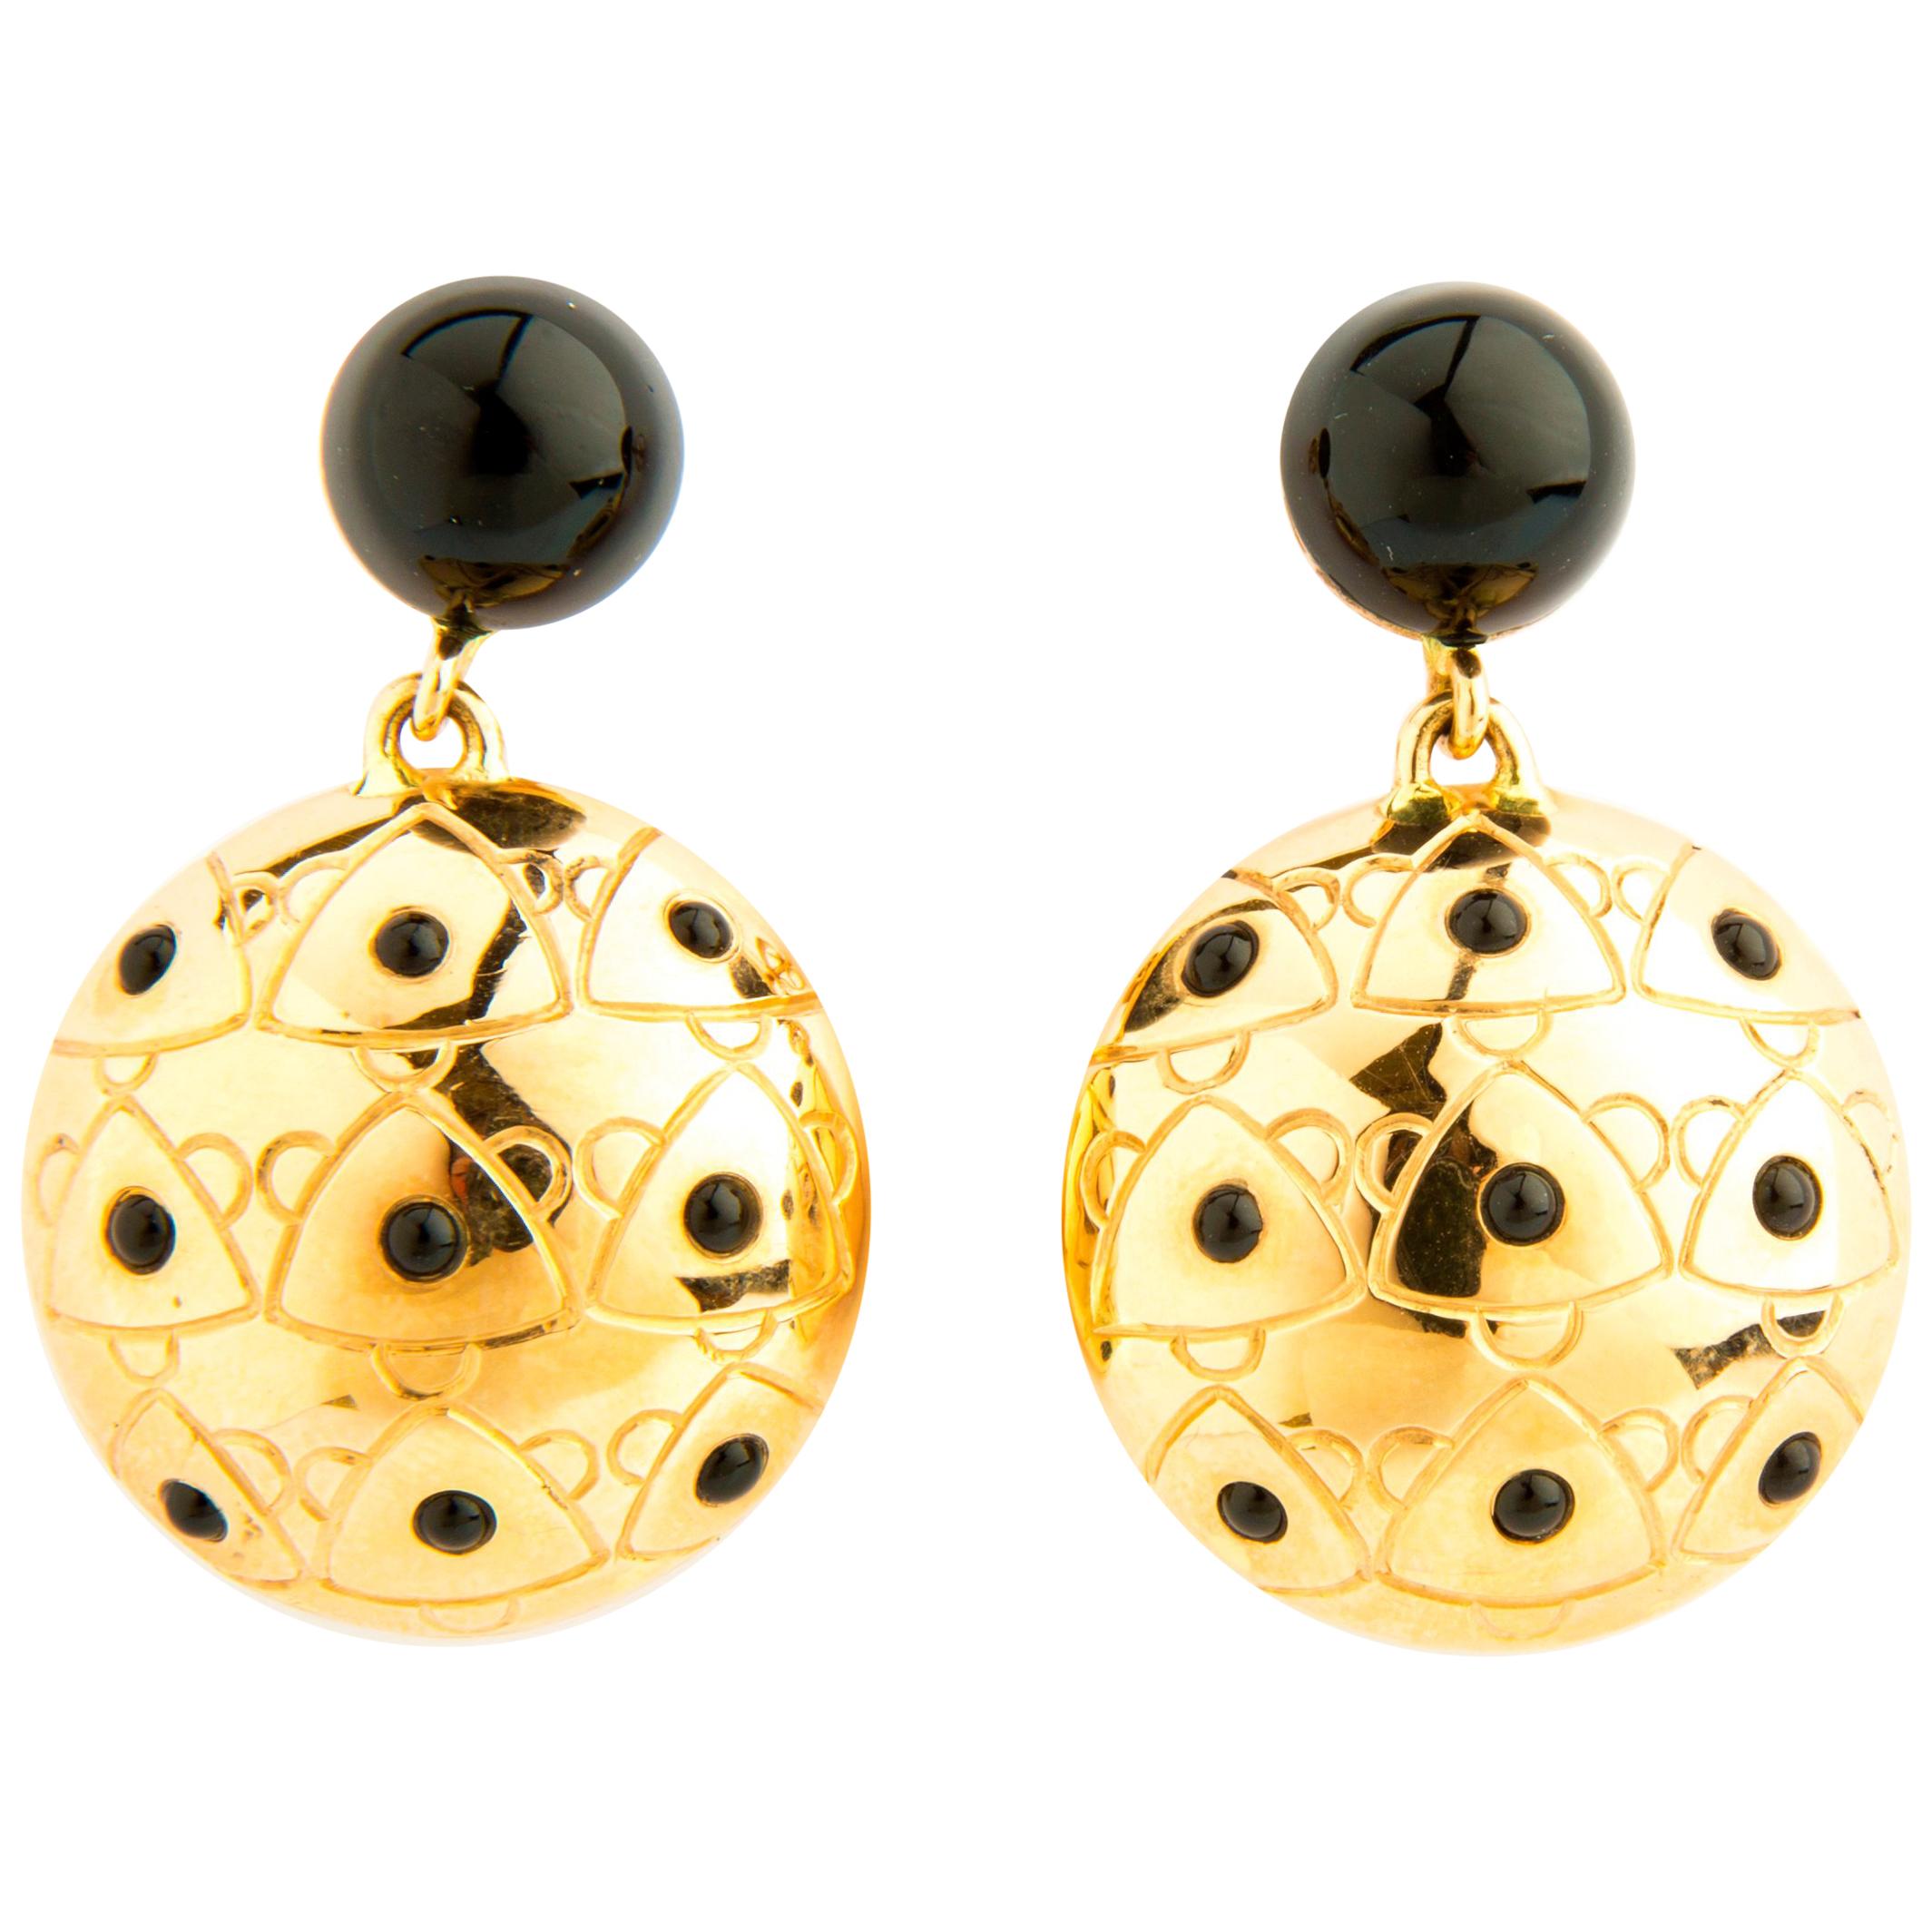 Sea Urchin Earrings with Onyx and Gold 18 Karat For Sale